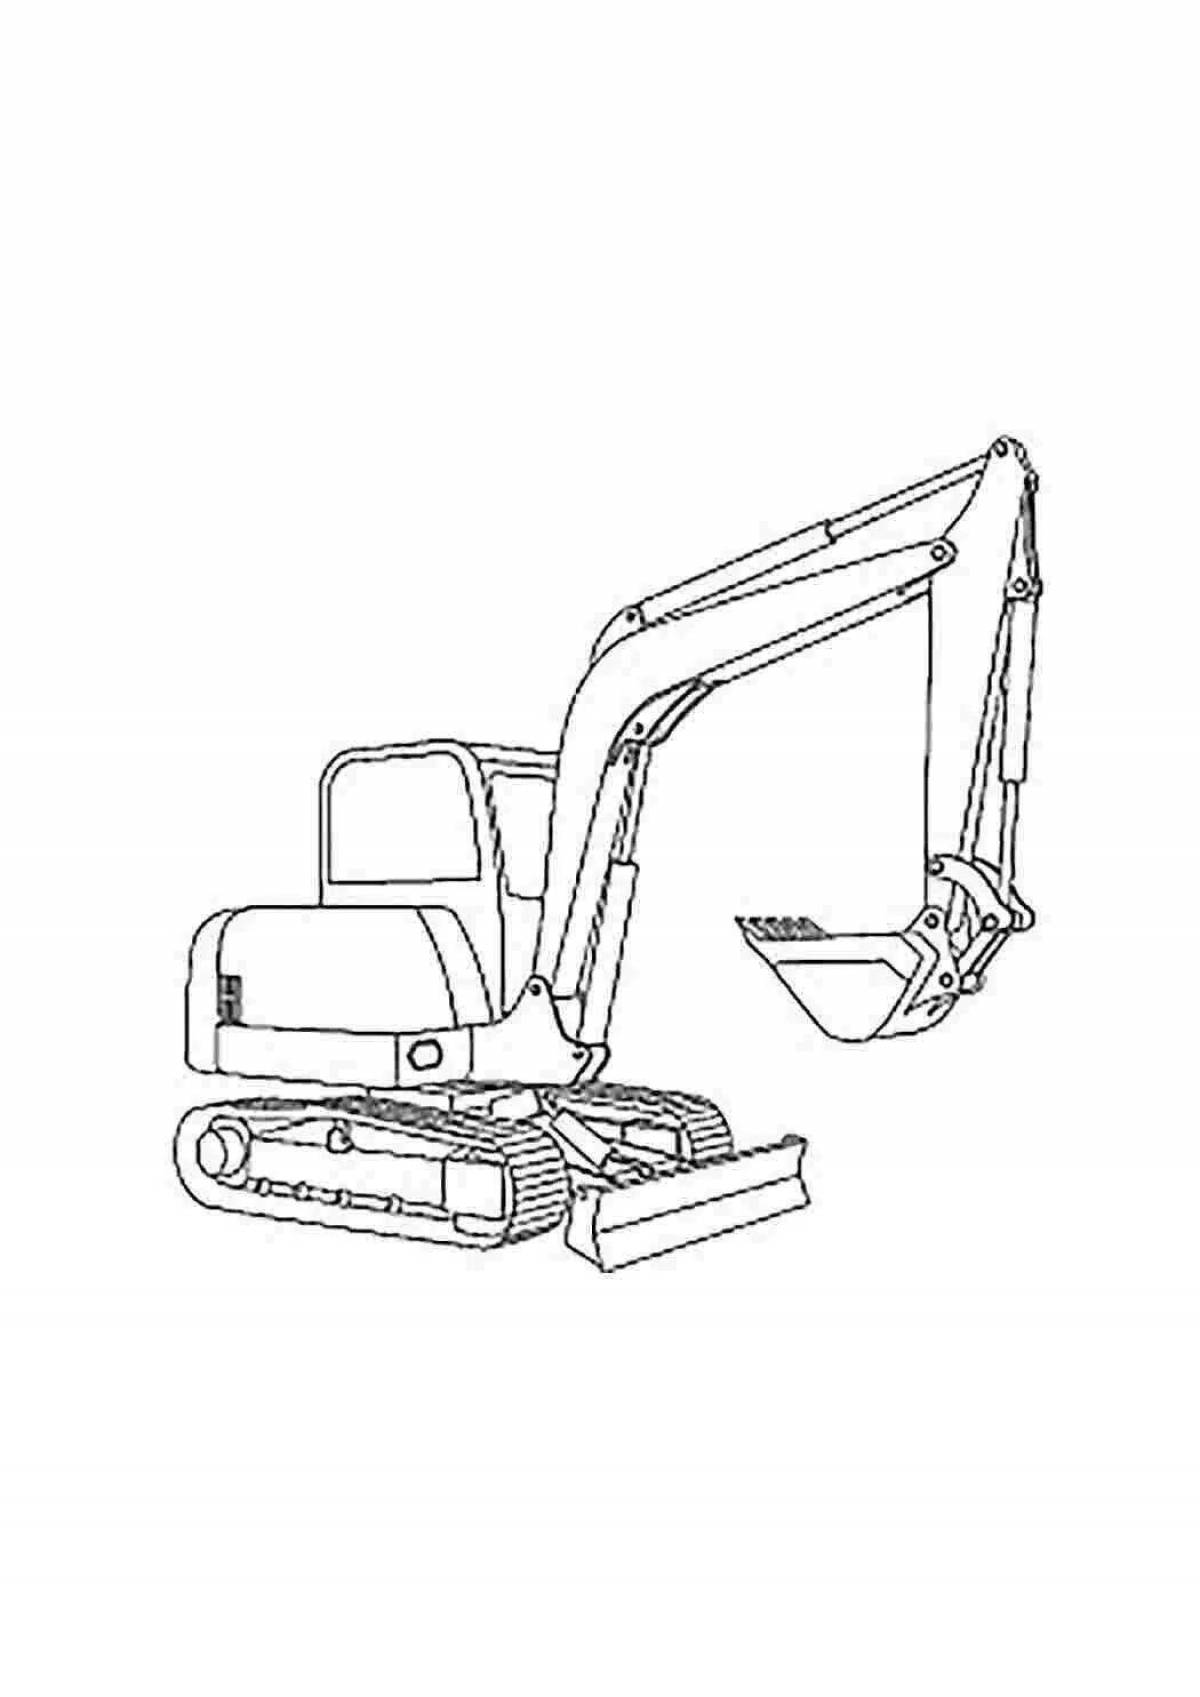 Interesting excavator coloring book for children 5-6 years old